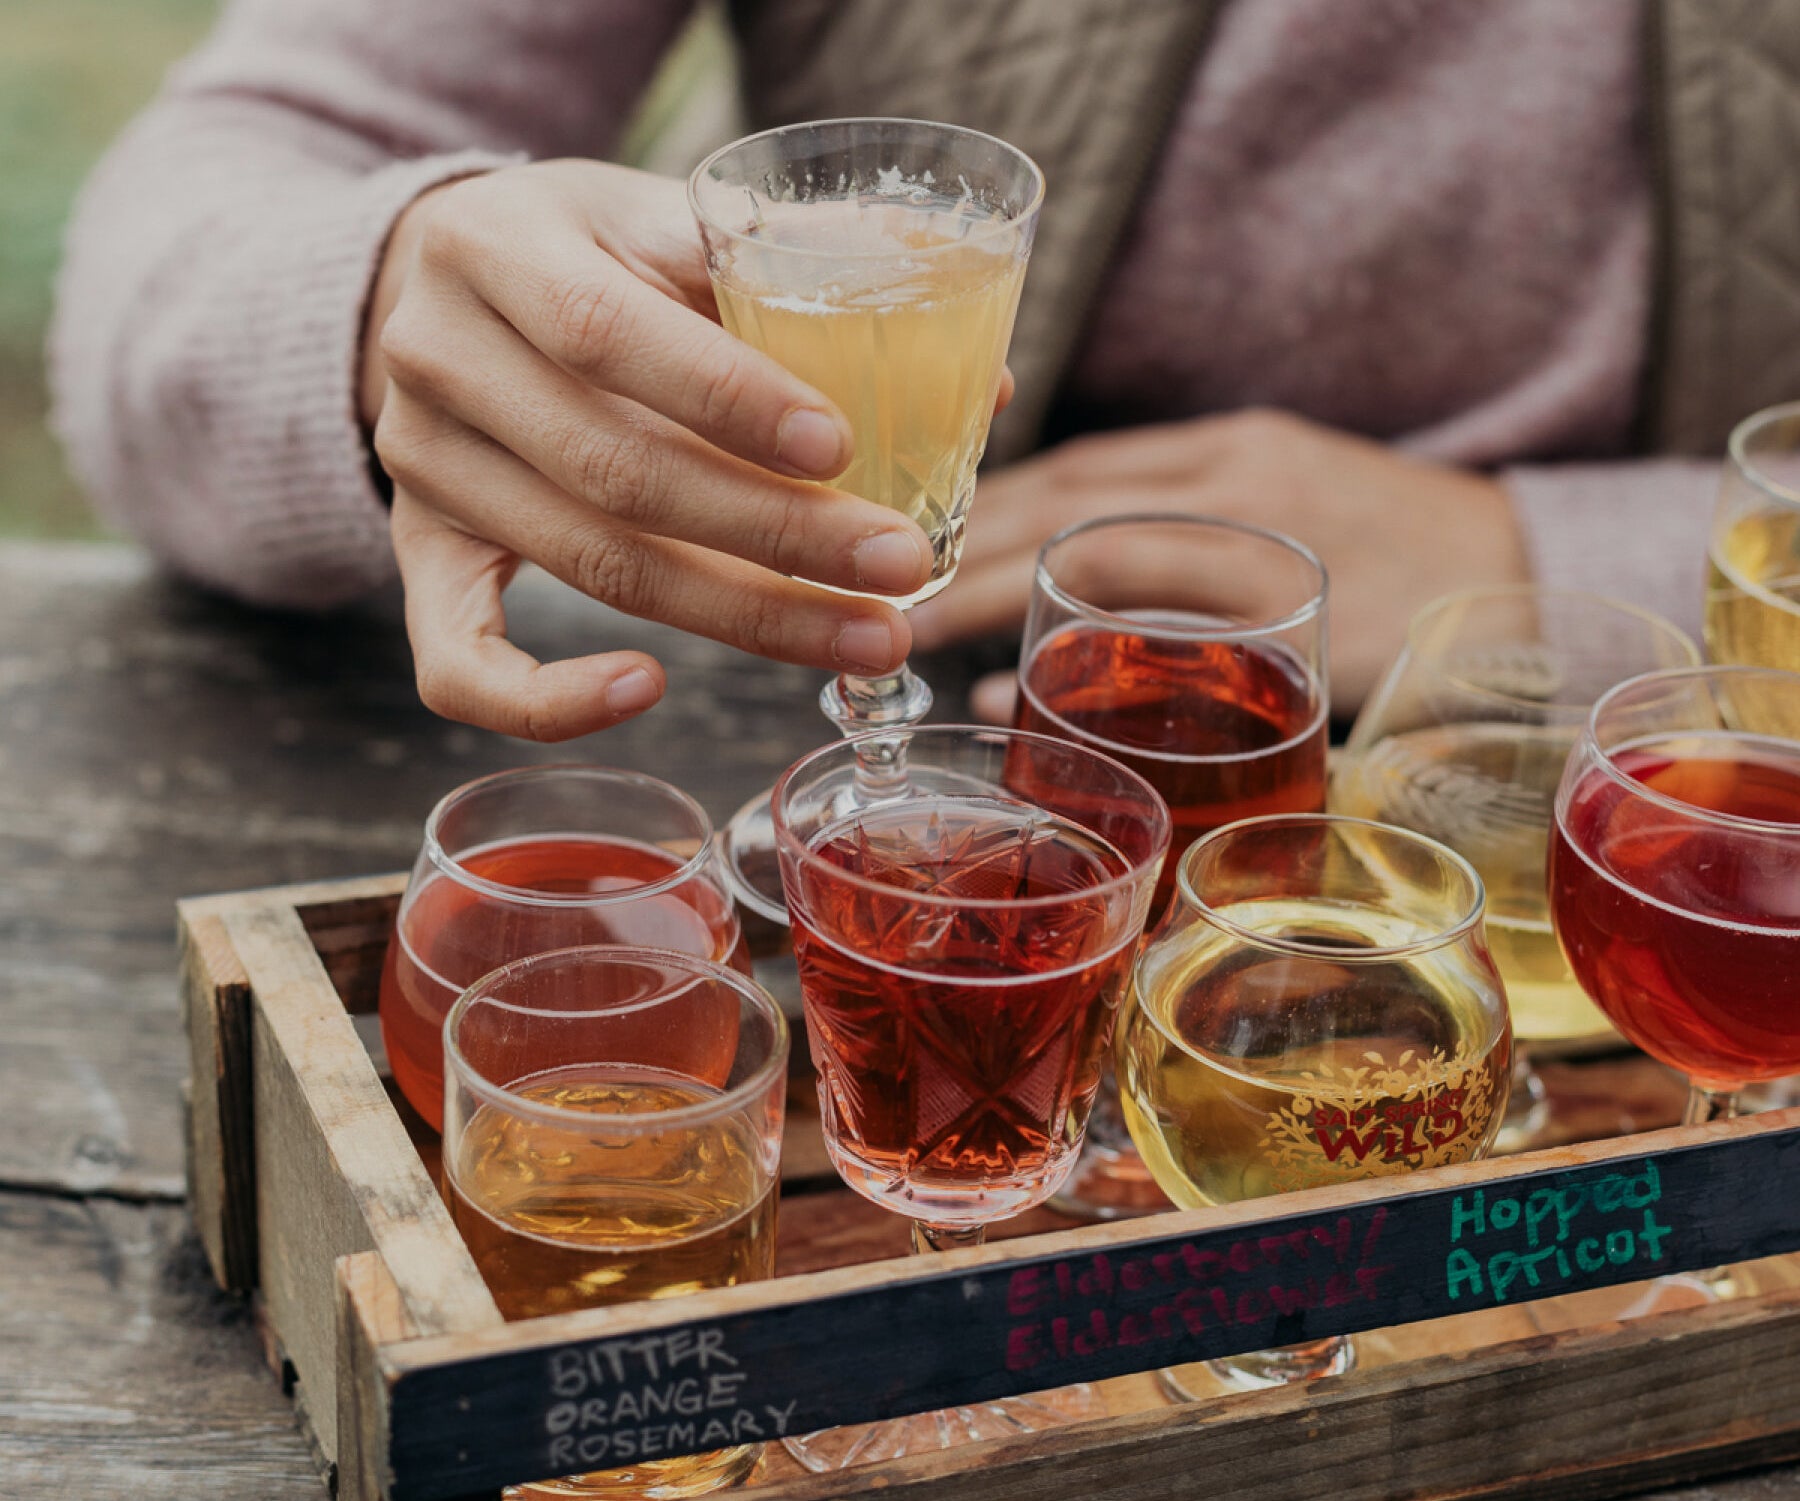 Salt Spring Wild Cider on Salt Spring Island has delicious cider flights, placed in mismatched glassware, pictured is a woman taking one to sip